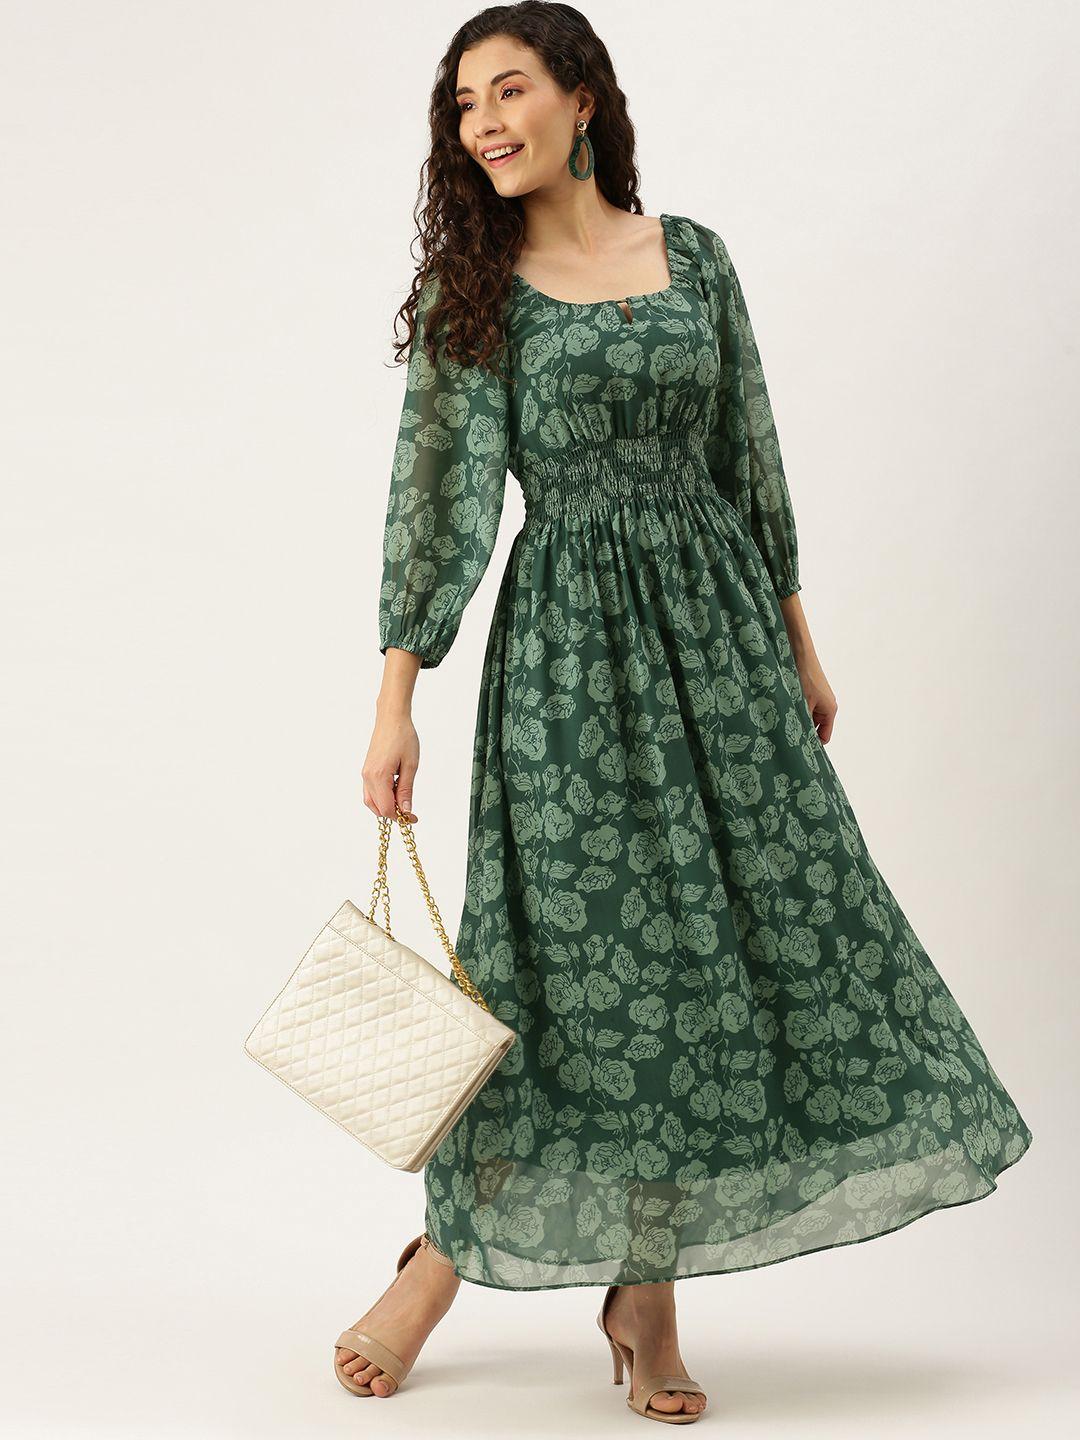 meloso teal green floral georgette maxi dress